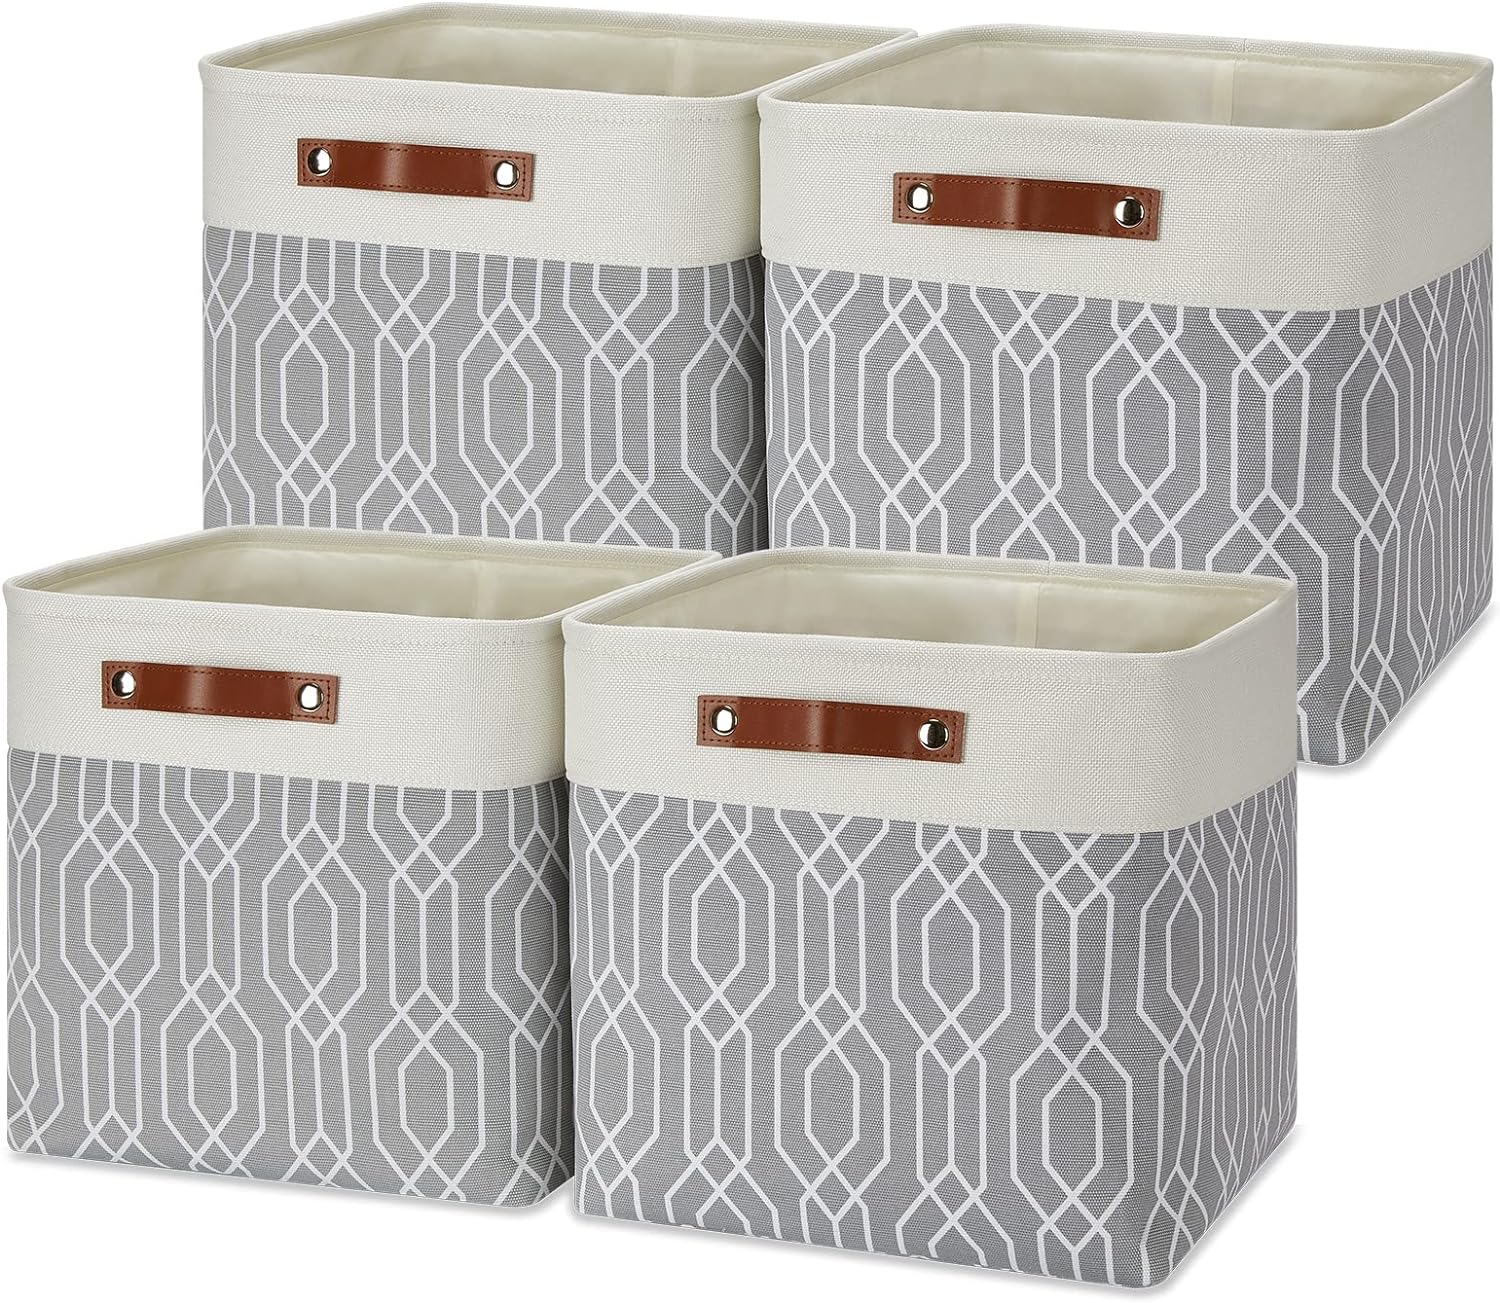 Temary Collapsible Baskets 13 Inch Storage Cubes for Organizing, Storage Baskets for Shelves, 4 Pack Fabric Storage Cubes Bins for Towels, Blankets (Grey Polygon)